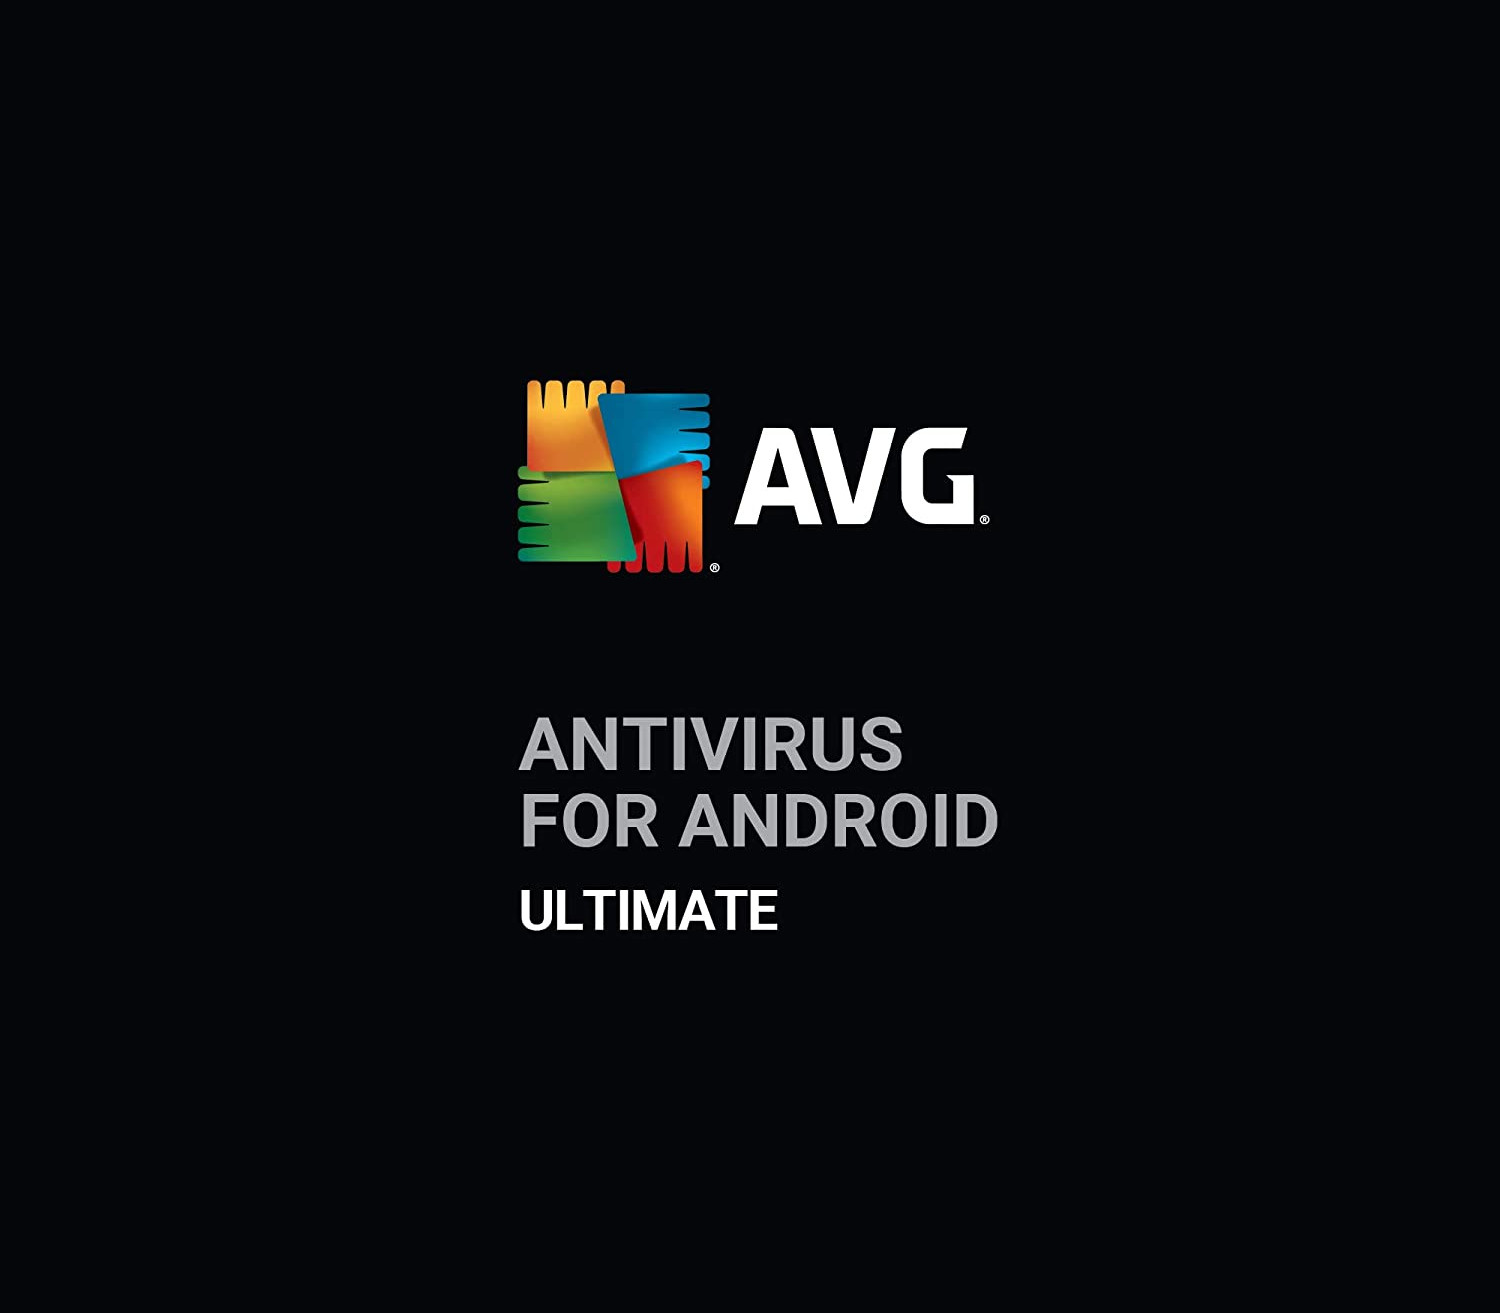 AVG Antivirus for Android - Ultimate Key (3 Years / 1 Device) 11.29 $